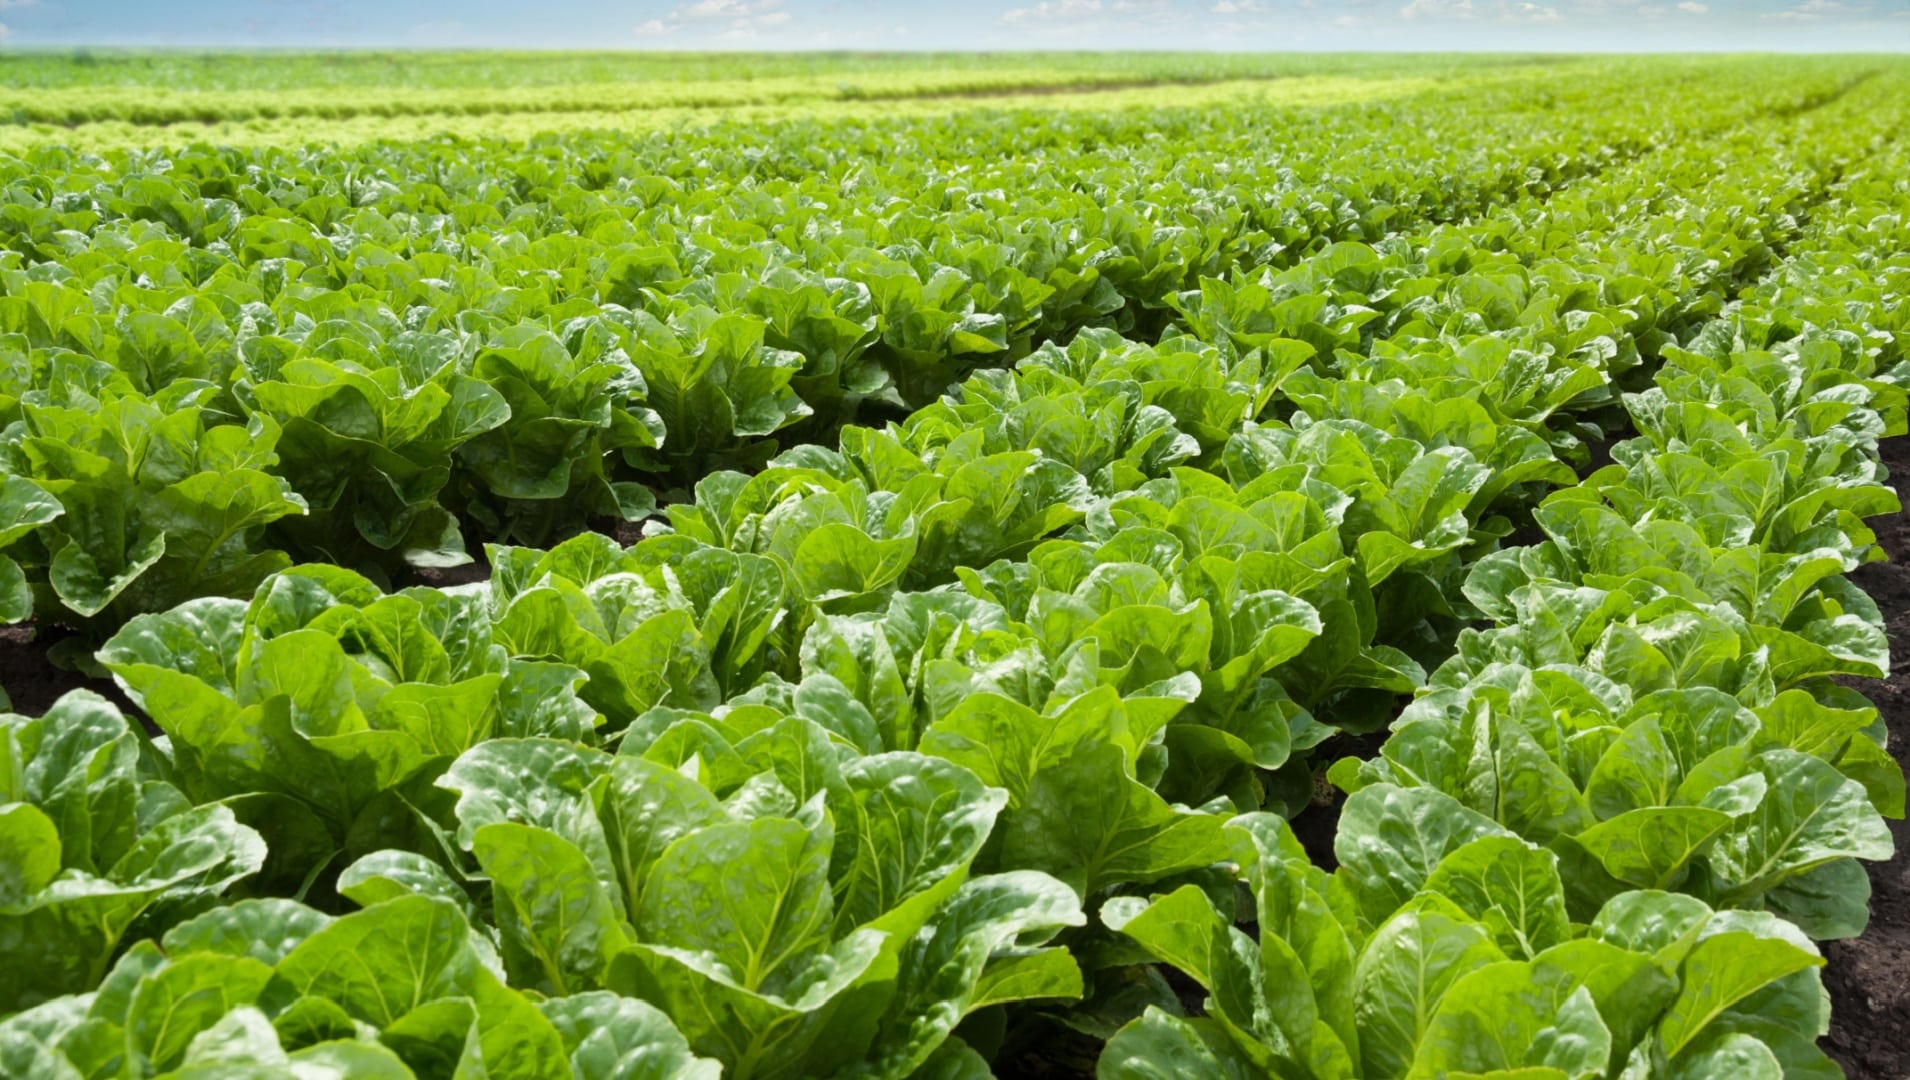 Spatial and Temporal N Management for Irrigated Vegetable Production Systems